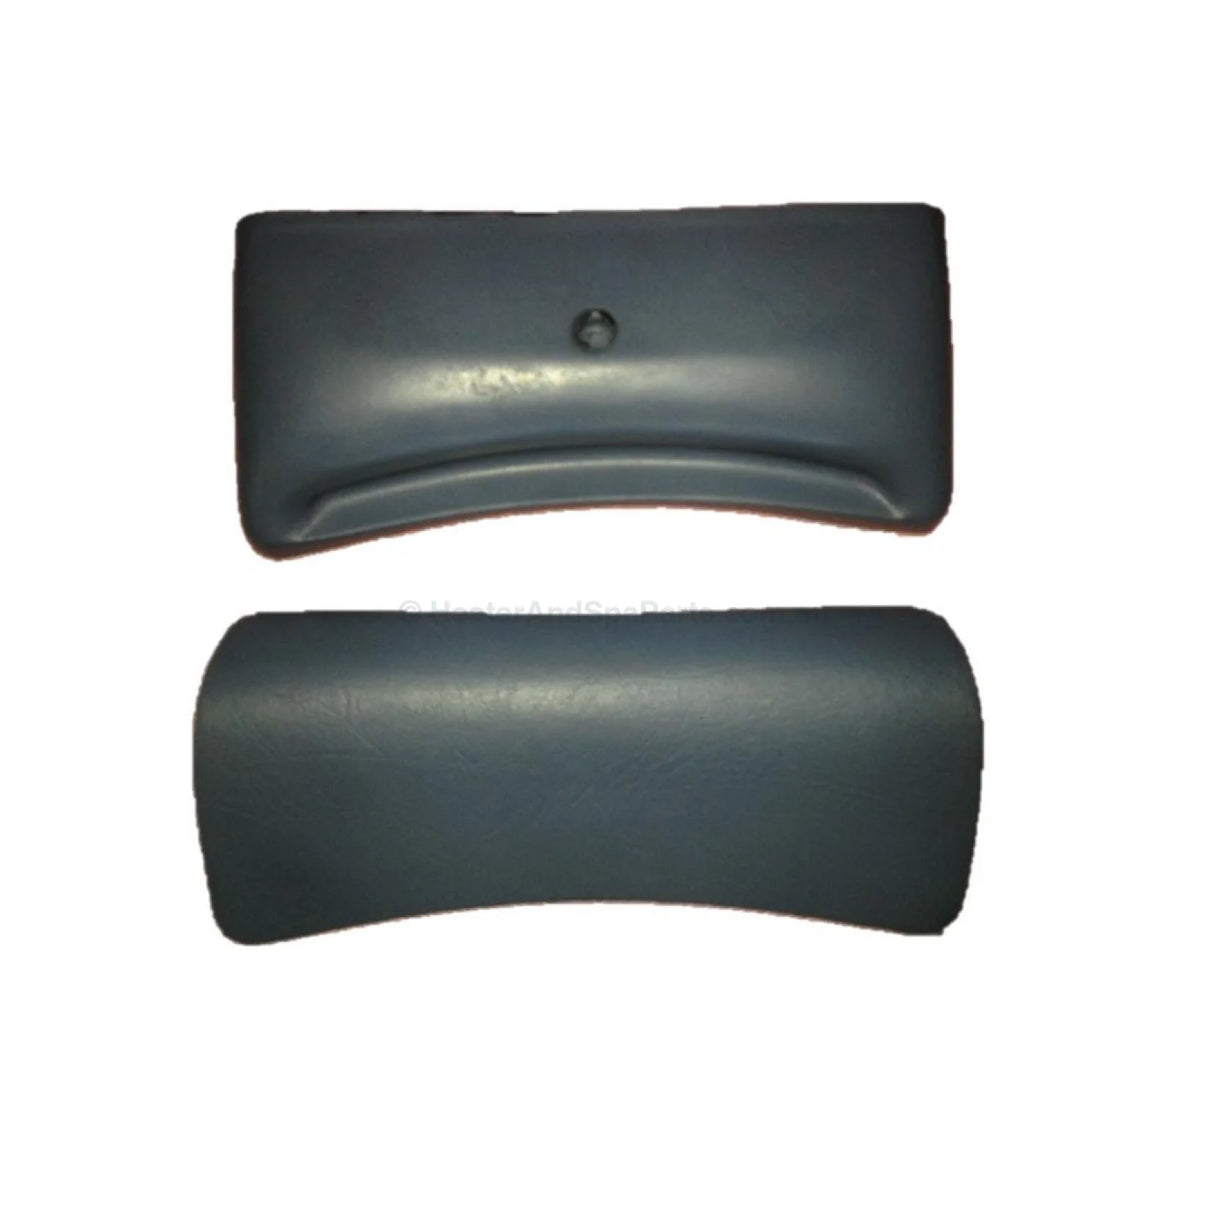 Ultima 1 Old Style Grey - Spa Headrest Pillow - Obsolete - No Longer Available - Heater and Spa Parts